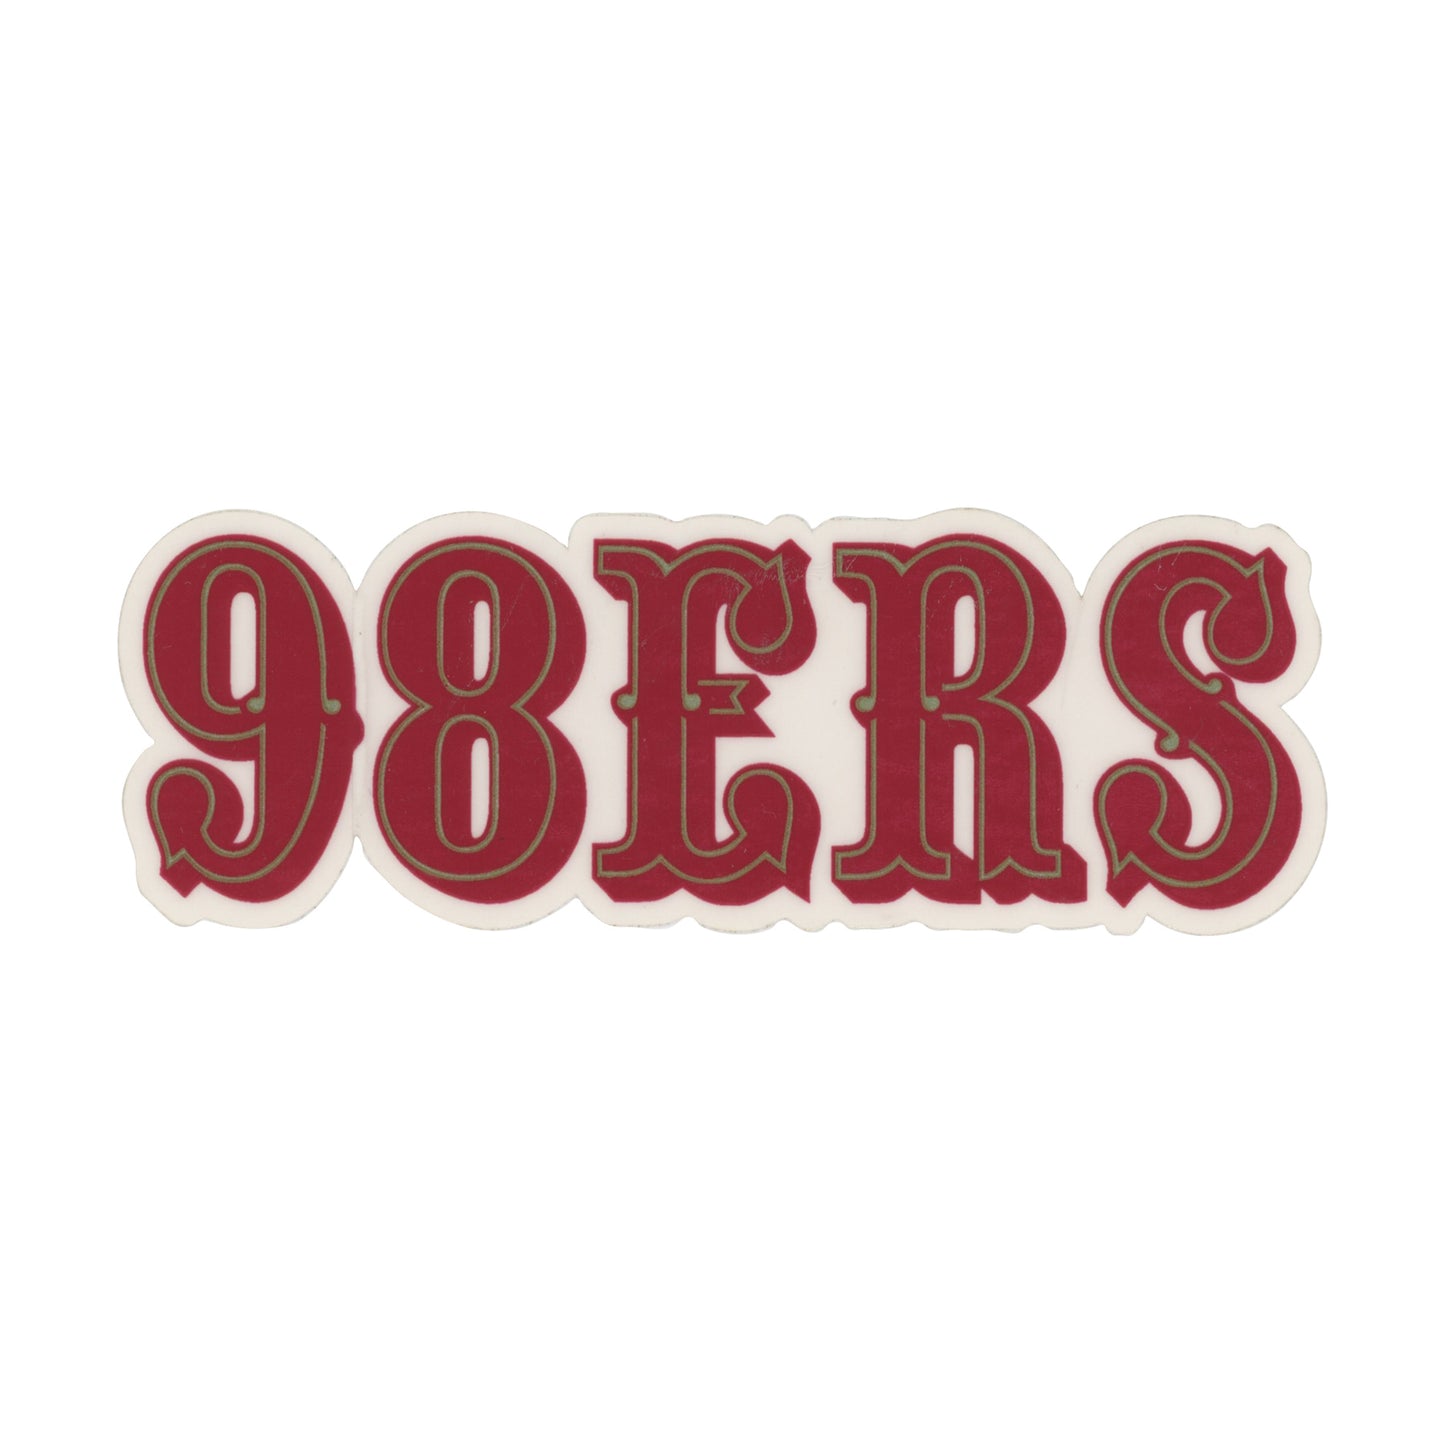 Aced Out 98ERS Red Sticker